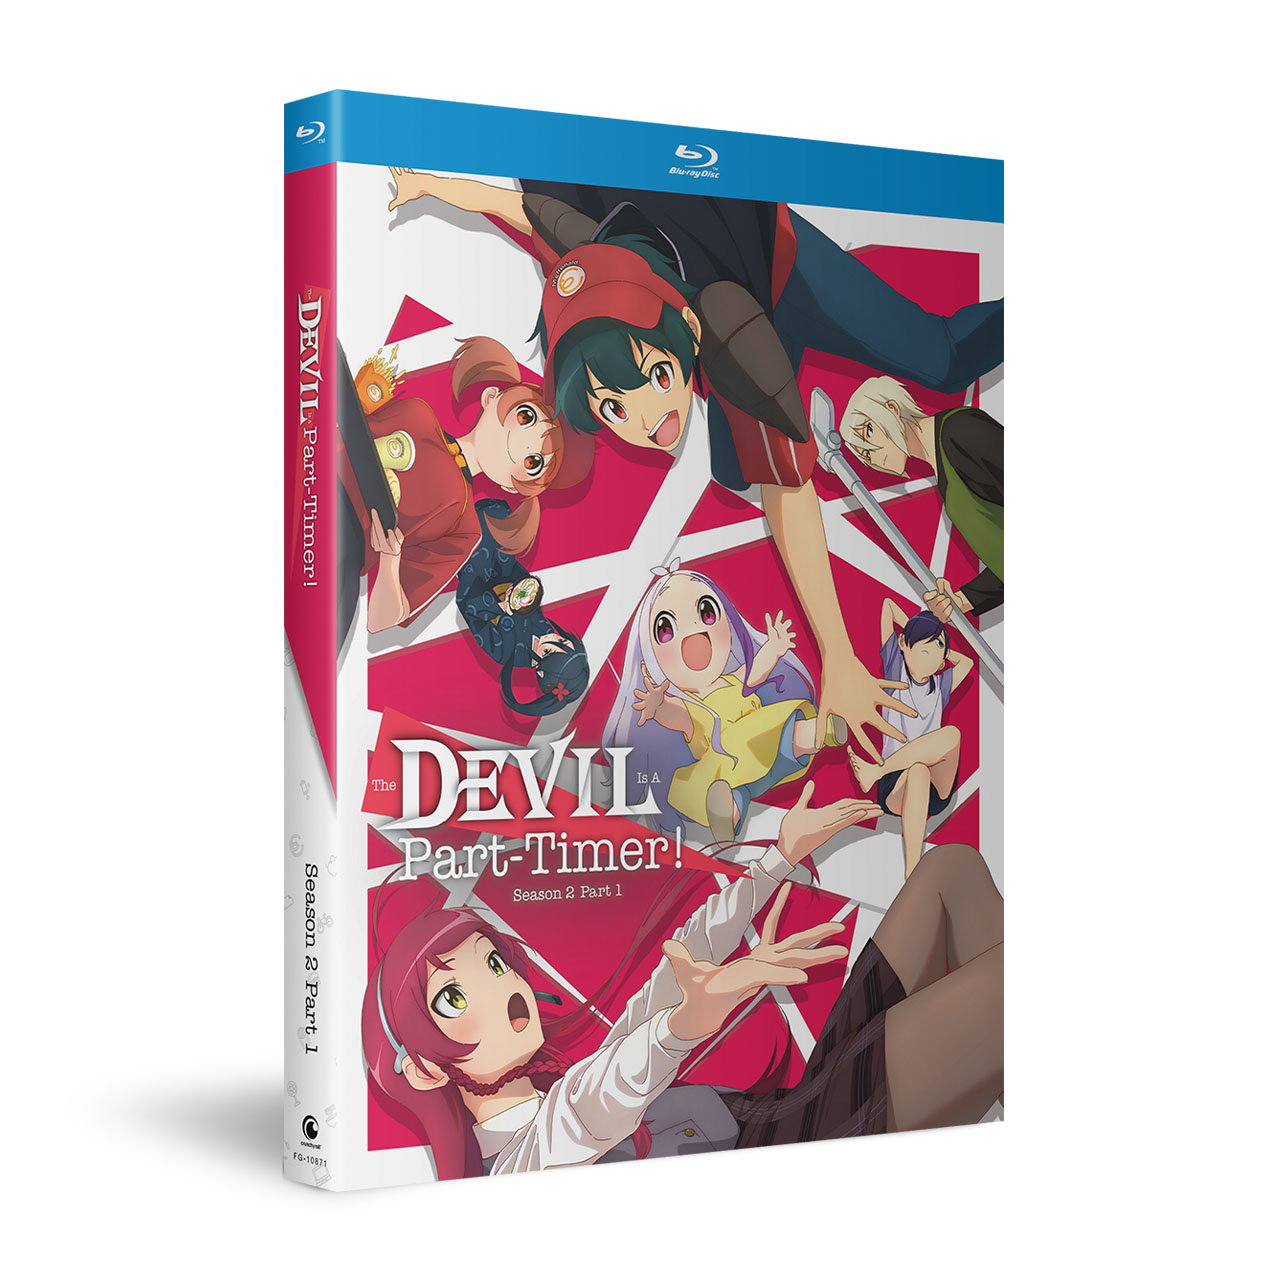 The Devil is a Part-Timer! - Season 2 Part 1 - Blu-ray image count 4